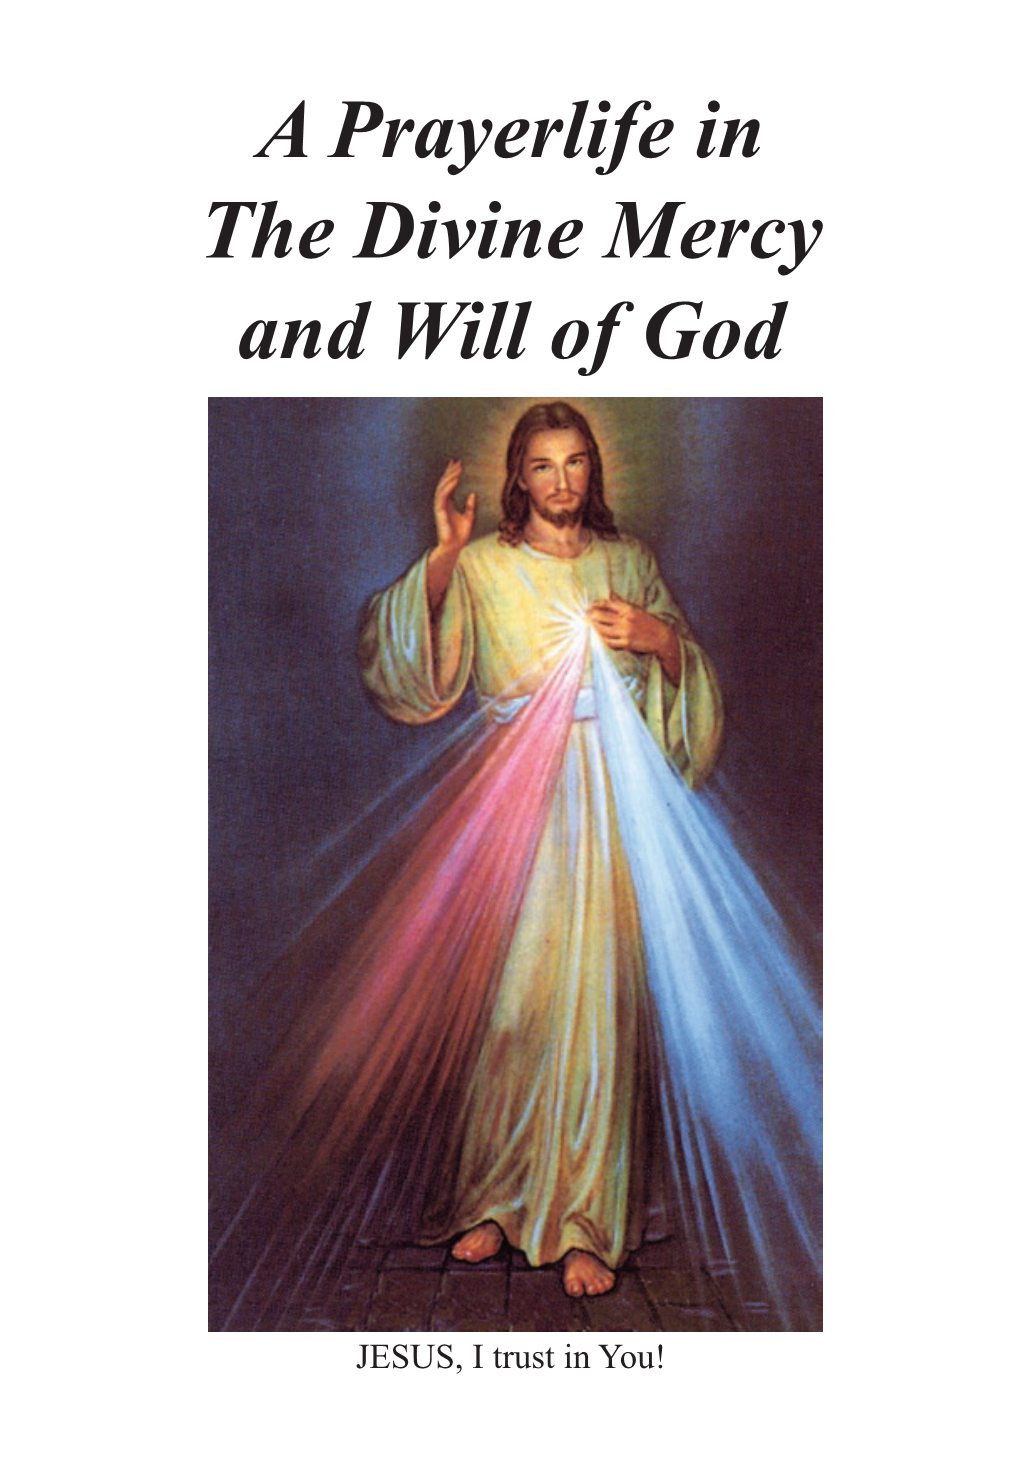 A Prayerlife in the Divine Mercy and Will of God